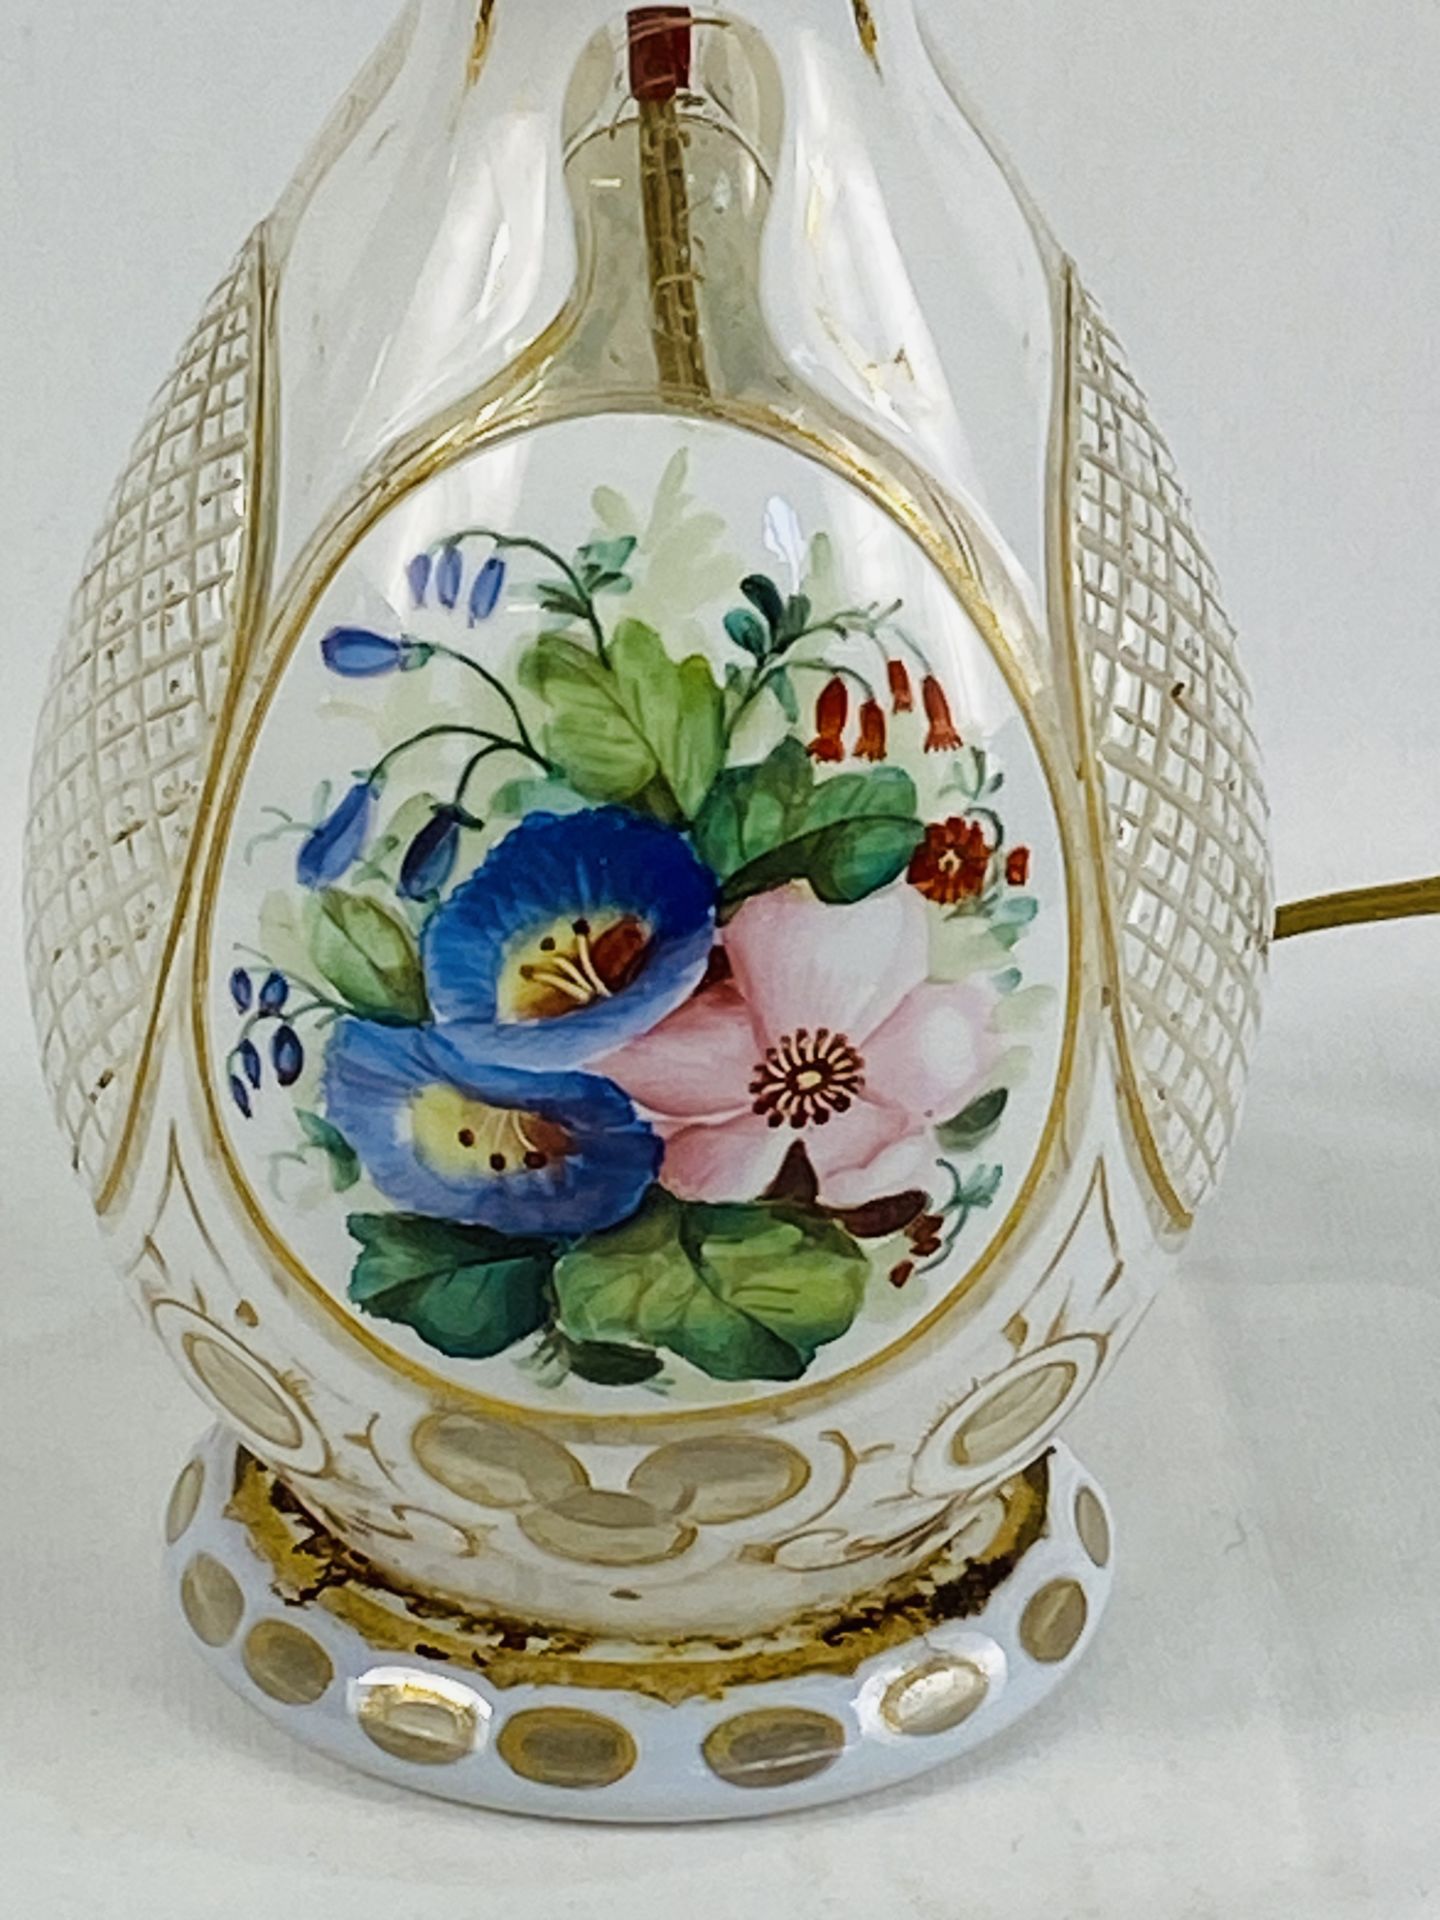 Opaque glass table lamp with hand painted flowers and gilt decoration, 27cms. Estimate £20-40. - Image 3 of 3